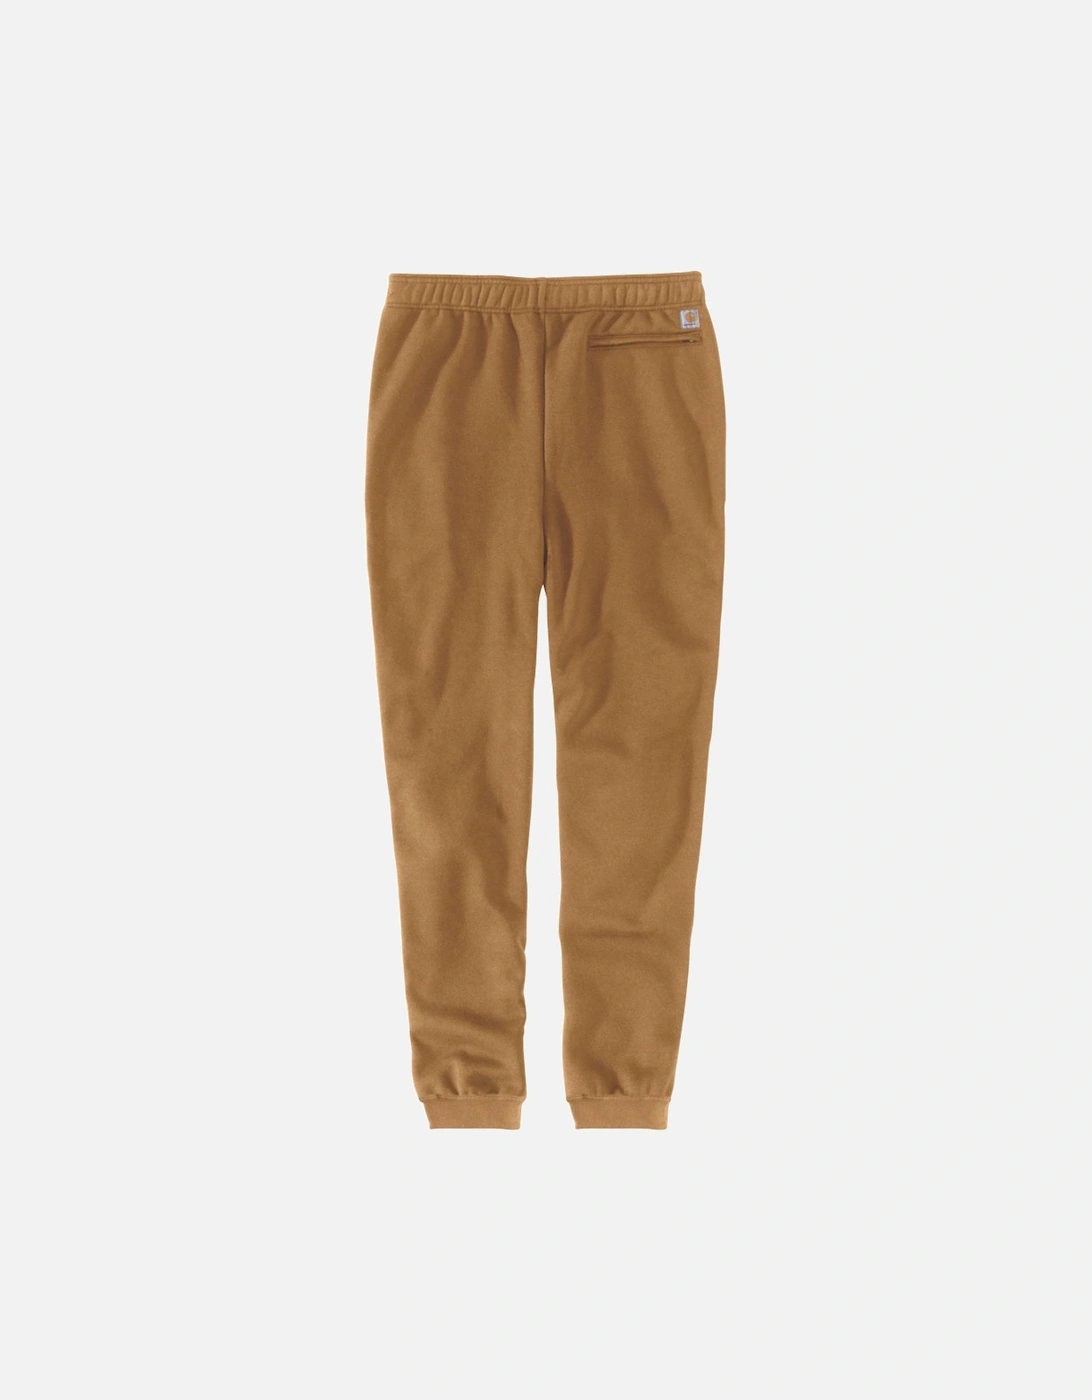 Carhartt Mens Midweight Tapered Sweatpant Joggers